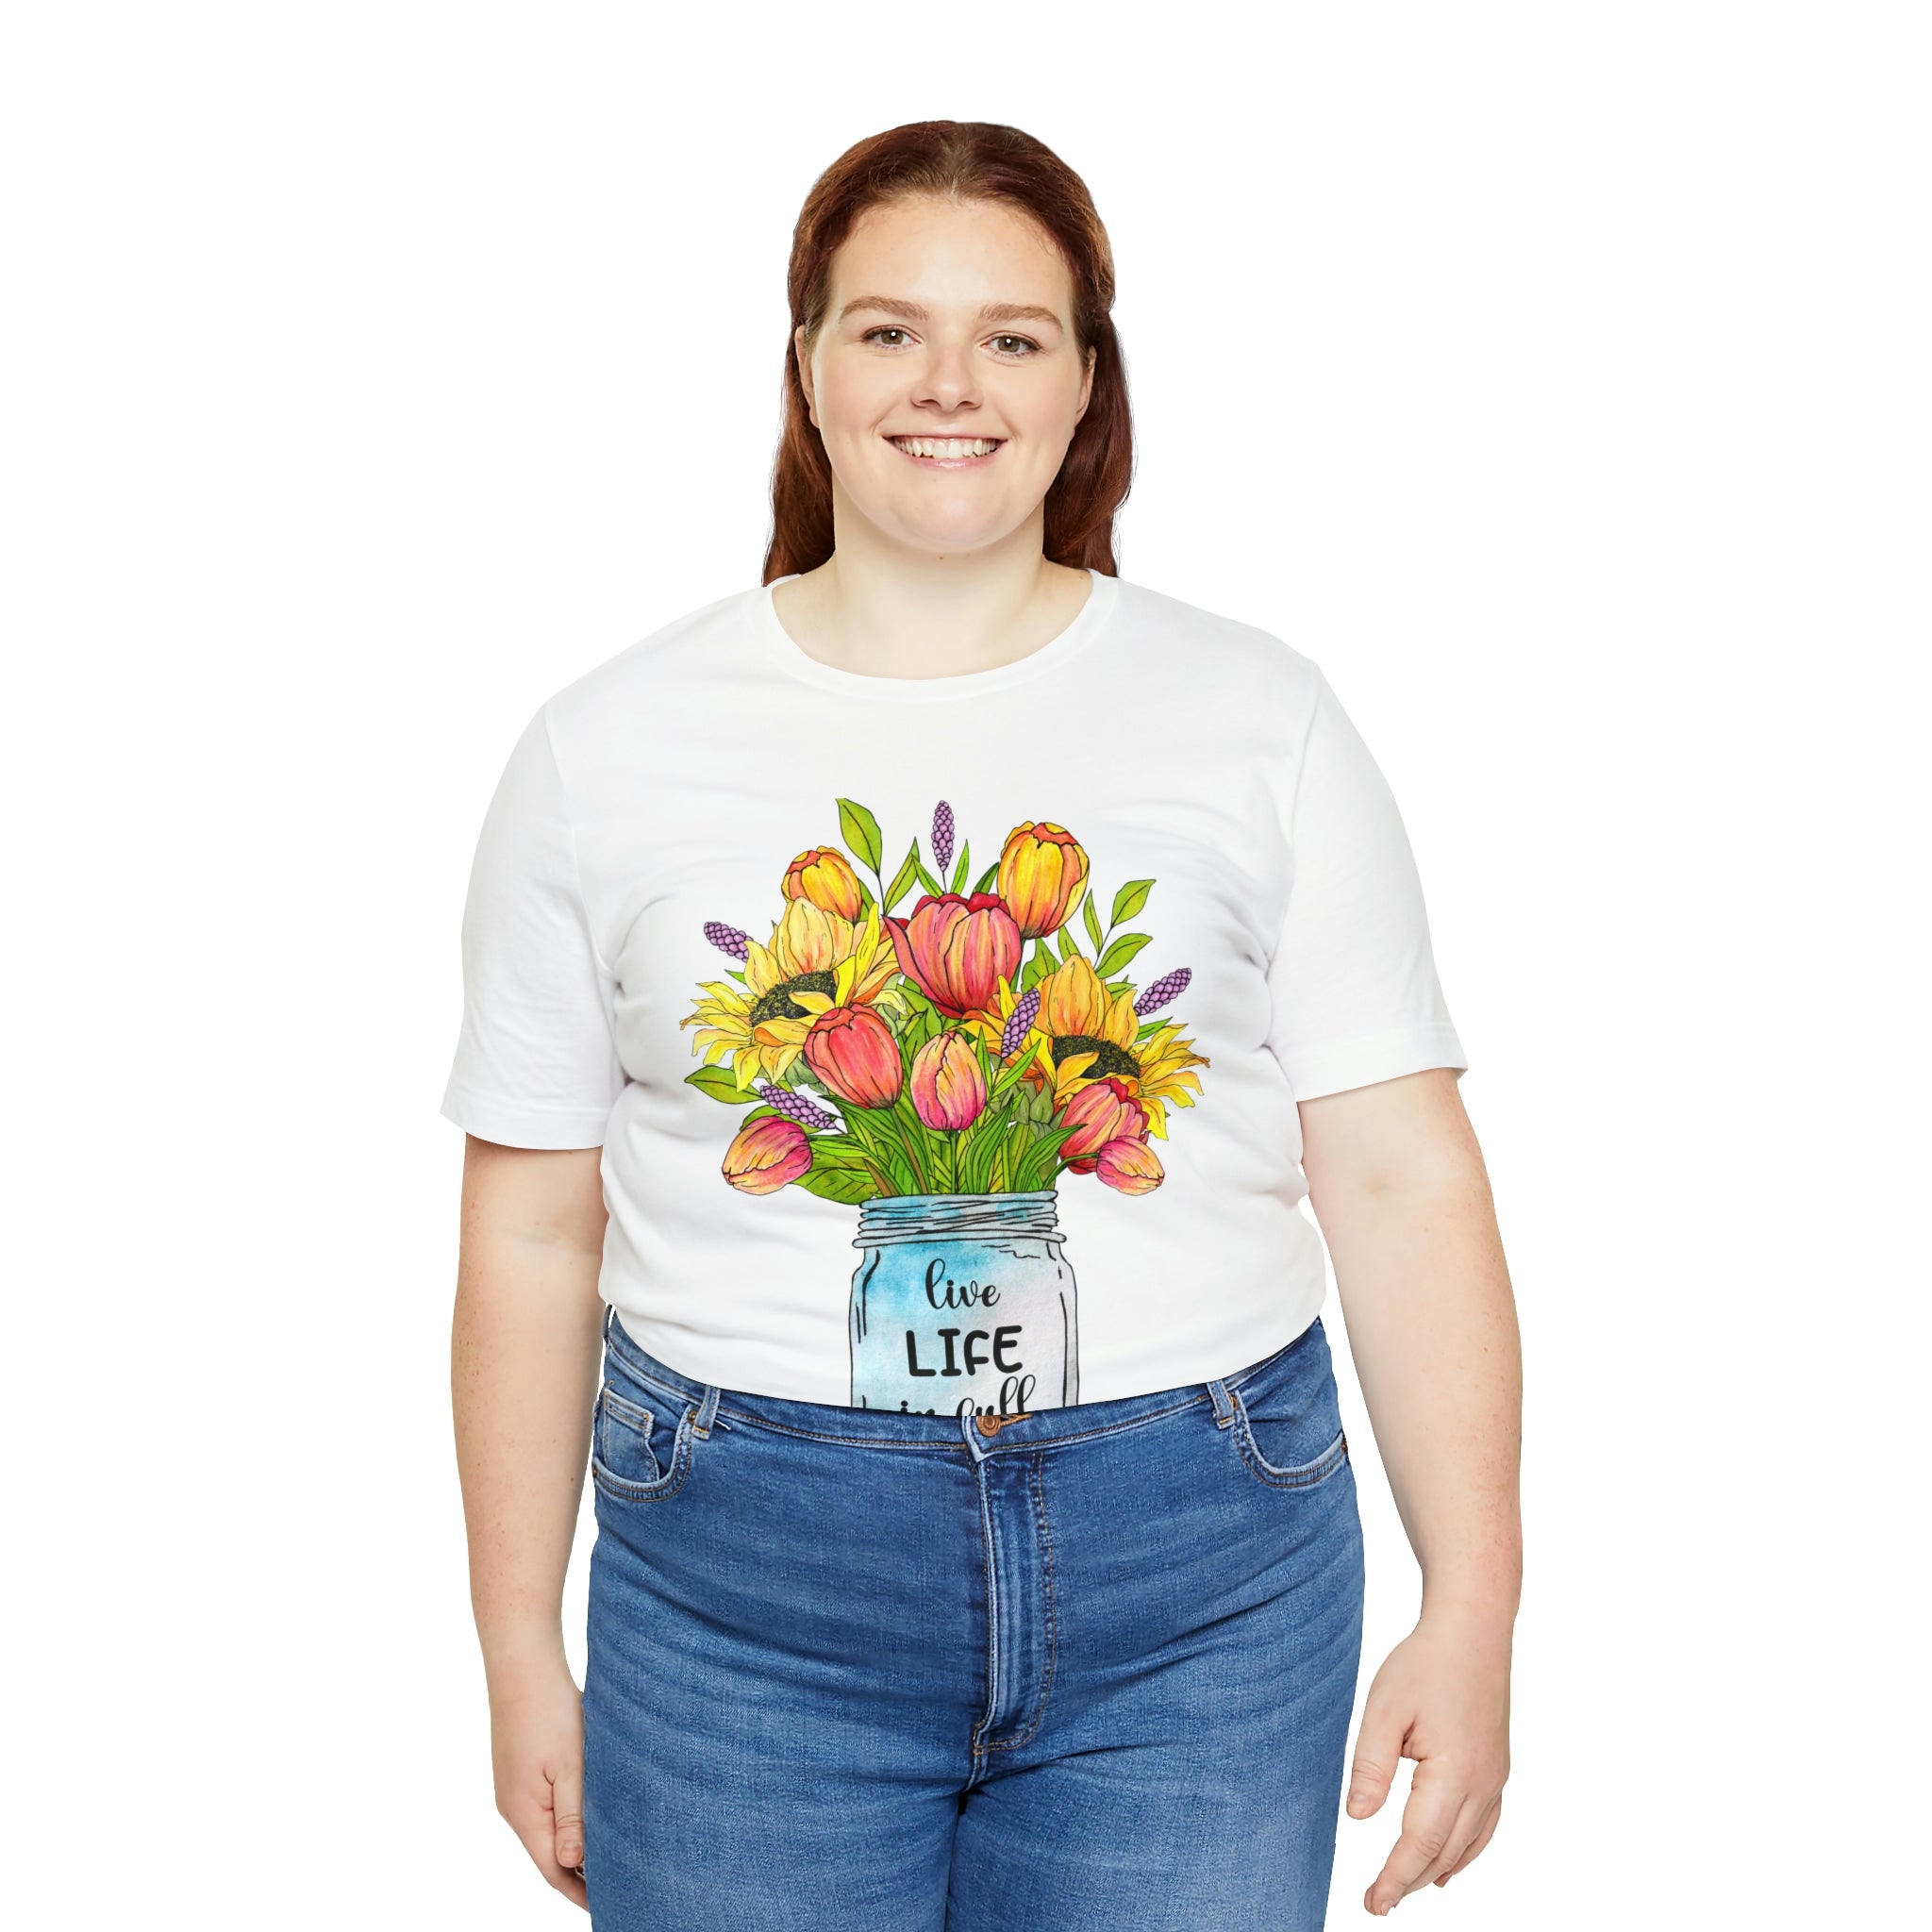 Garden Shirt Live Life In Full Bloom T-Shirt The Ultimate Tee for Plant Lovers